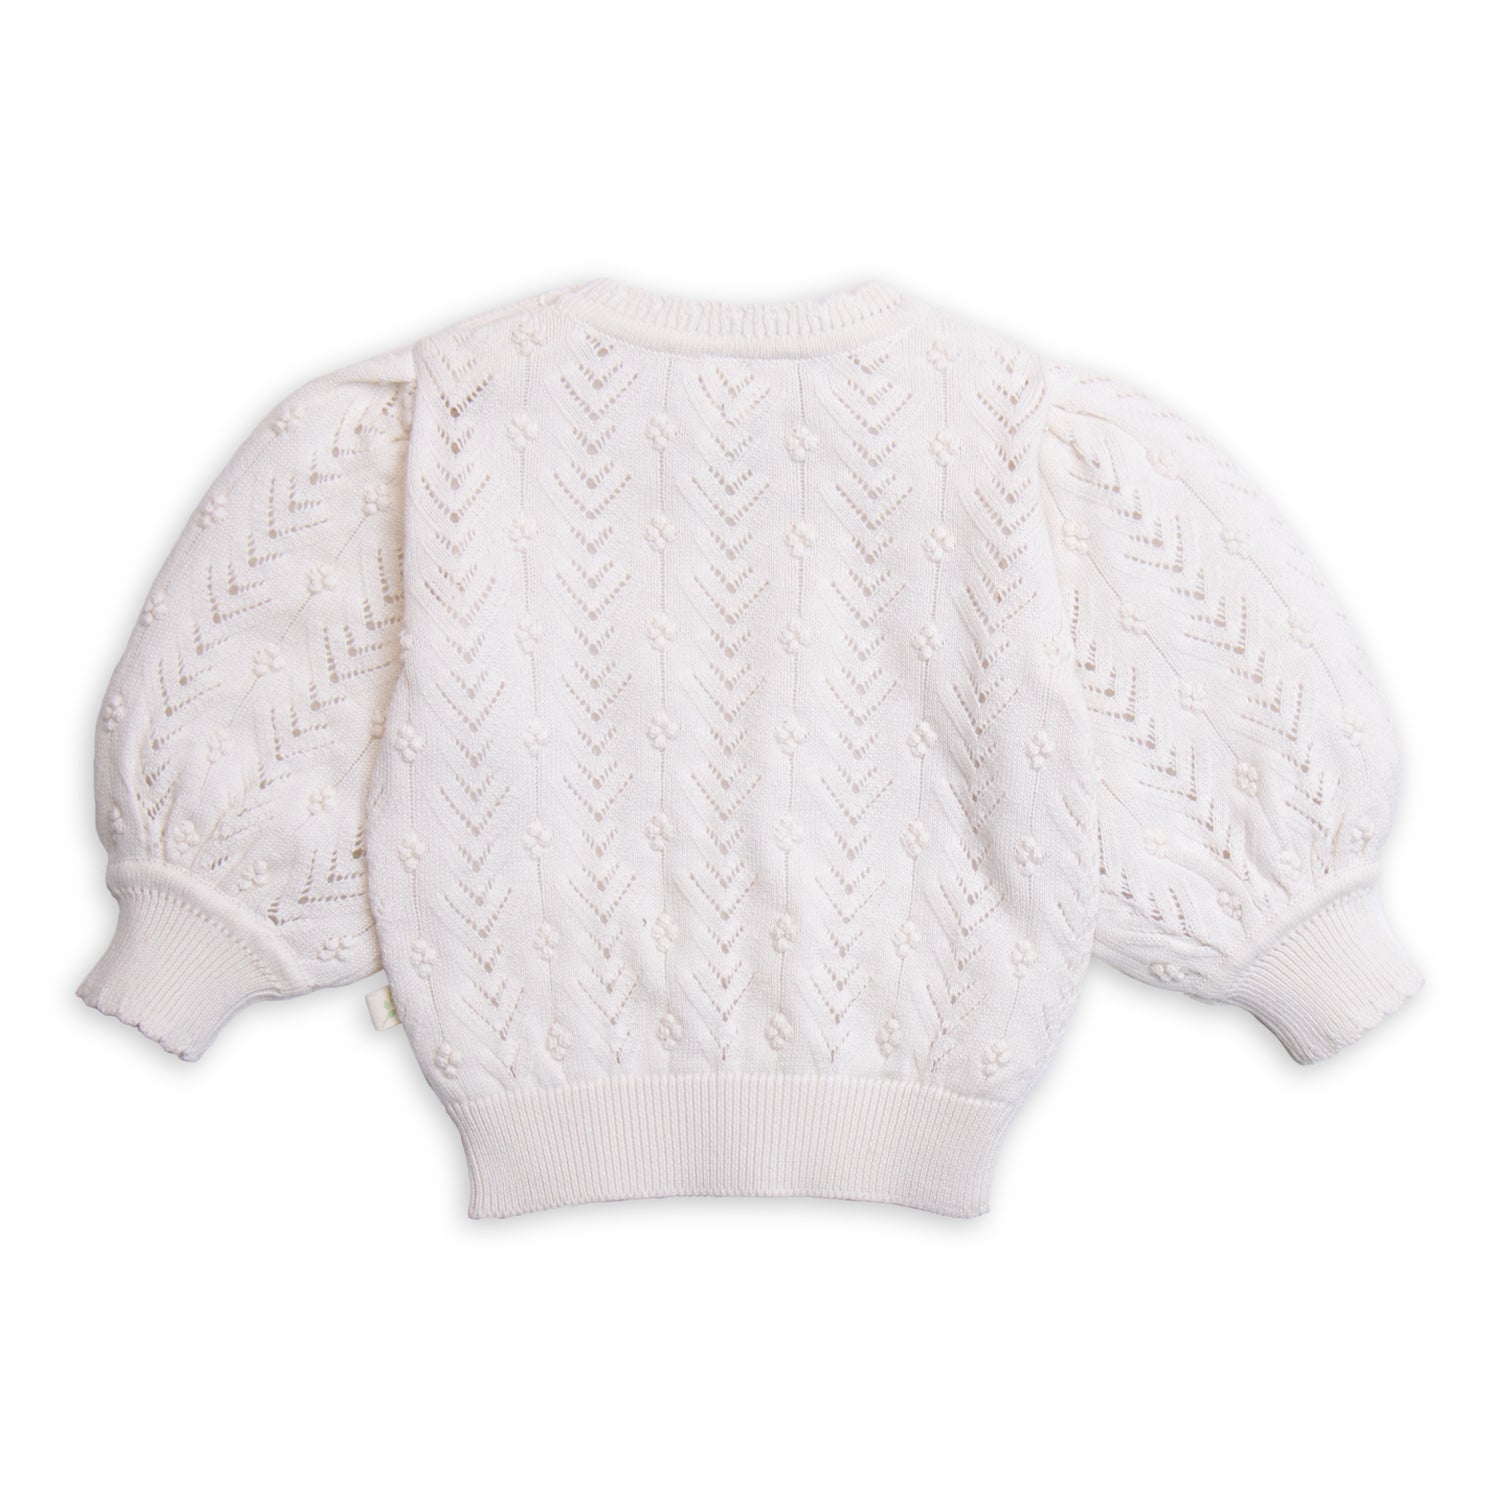 Snow White Berry Knit Sweater